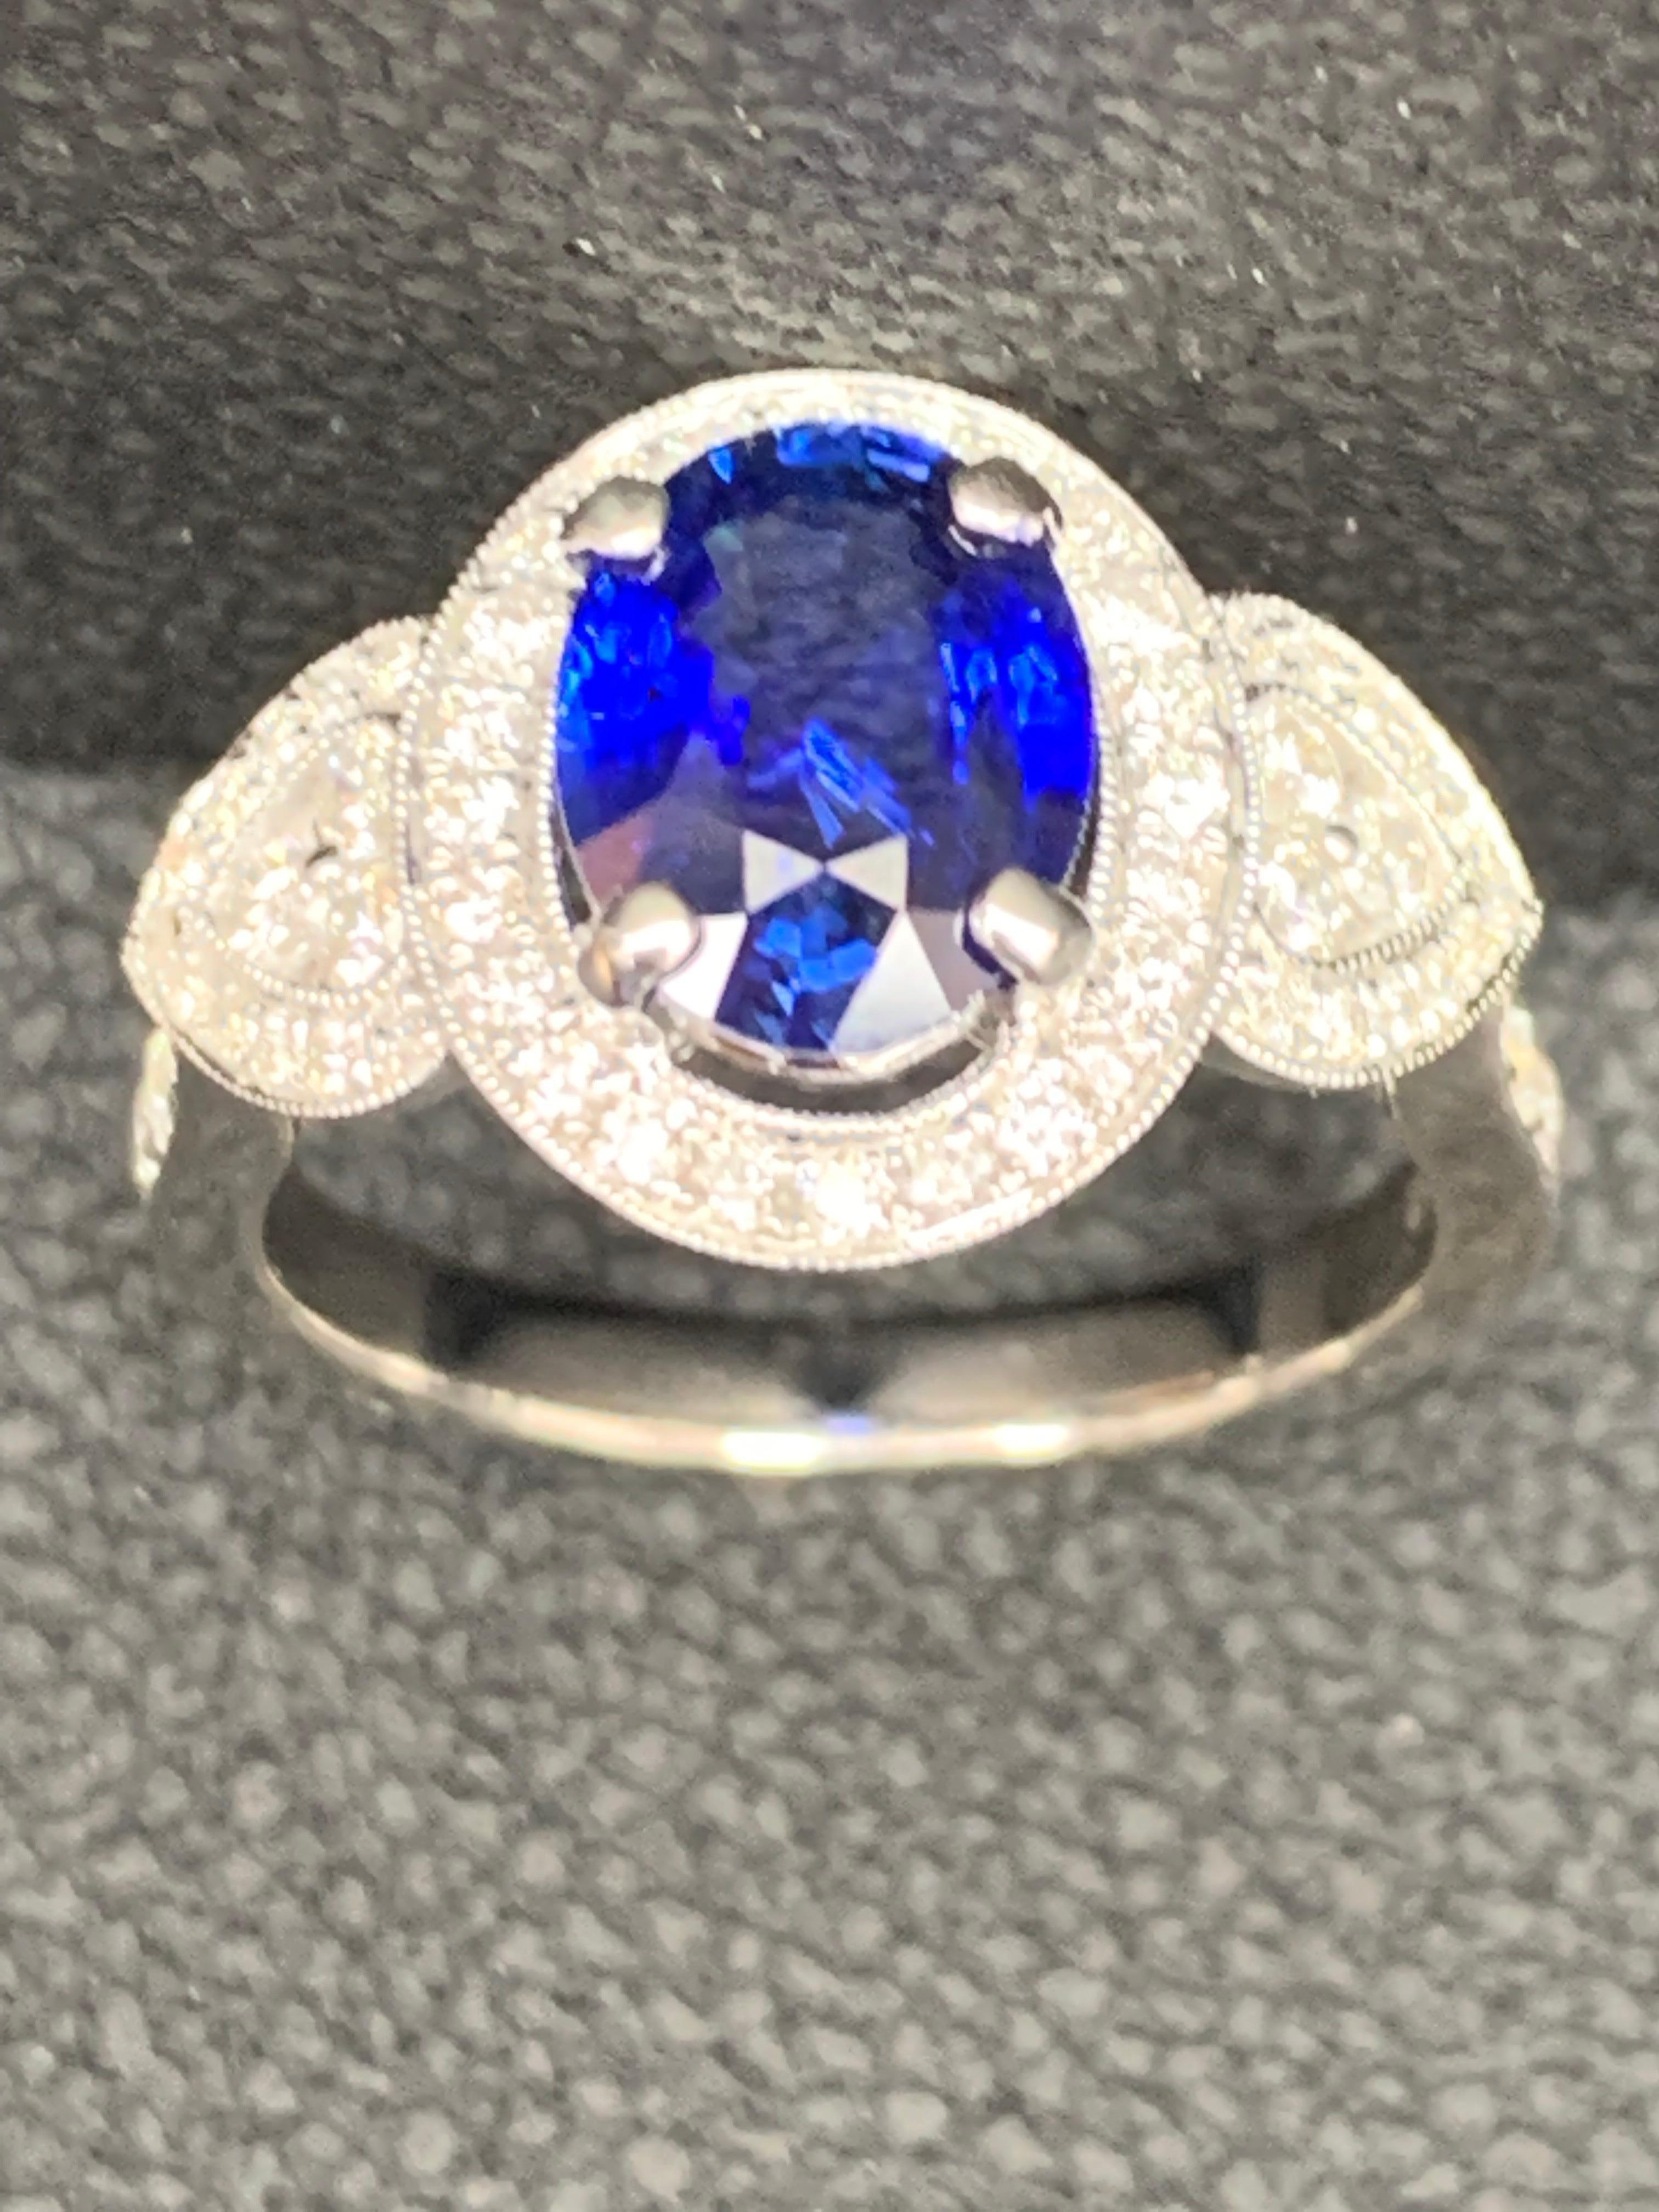 This engagement ring features a 2.08 carat oval cut blue sapphire set in 4 prongs made with 18 Carats white gold. The center stone is flanked by round brilliant diamonds. A floating halo of melee diamonds accent the side diamonds for a unique